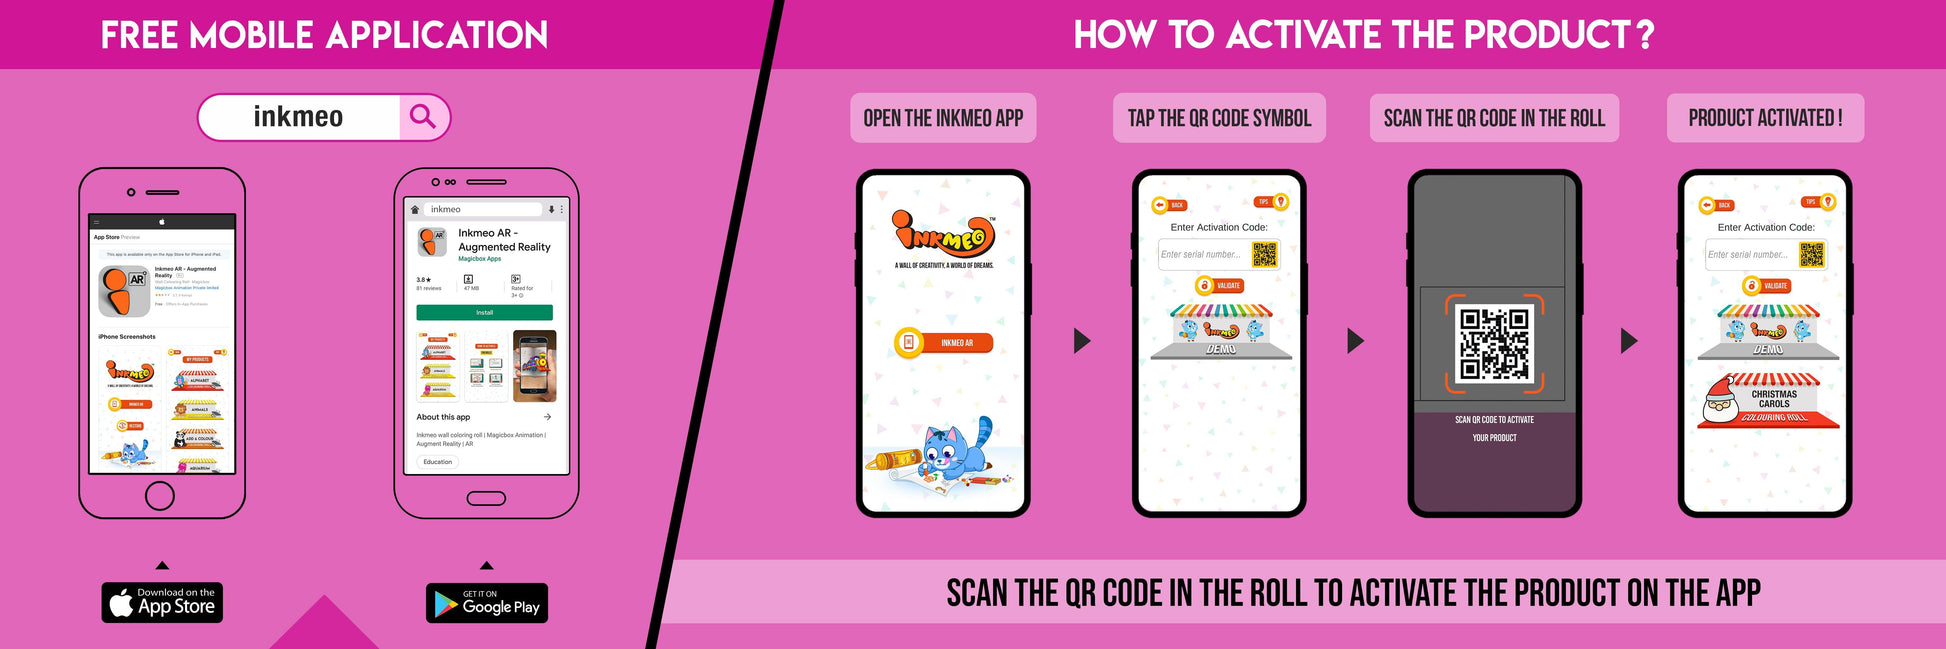 The image features a pink background split into two sections. The first showcases a free mobile app to download Inkmeo from the App Store and Google Store. The second displays four phones with the text "To access the Inkmeo app, tap the QR code icon, scan the QR code on the package, and activate the product."